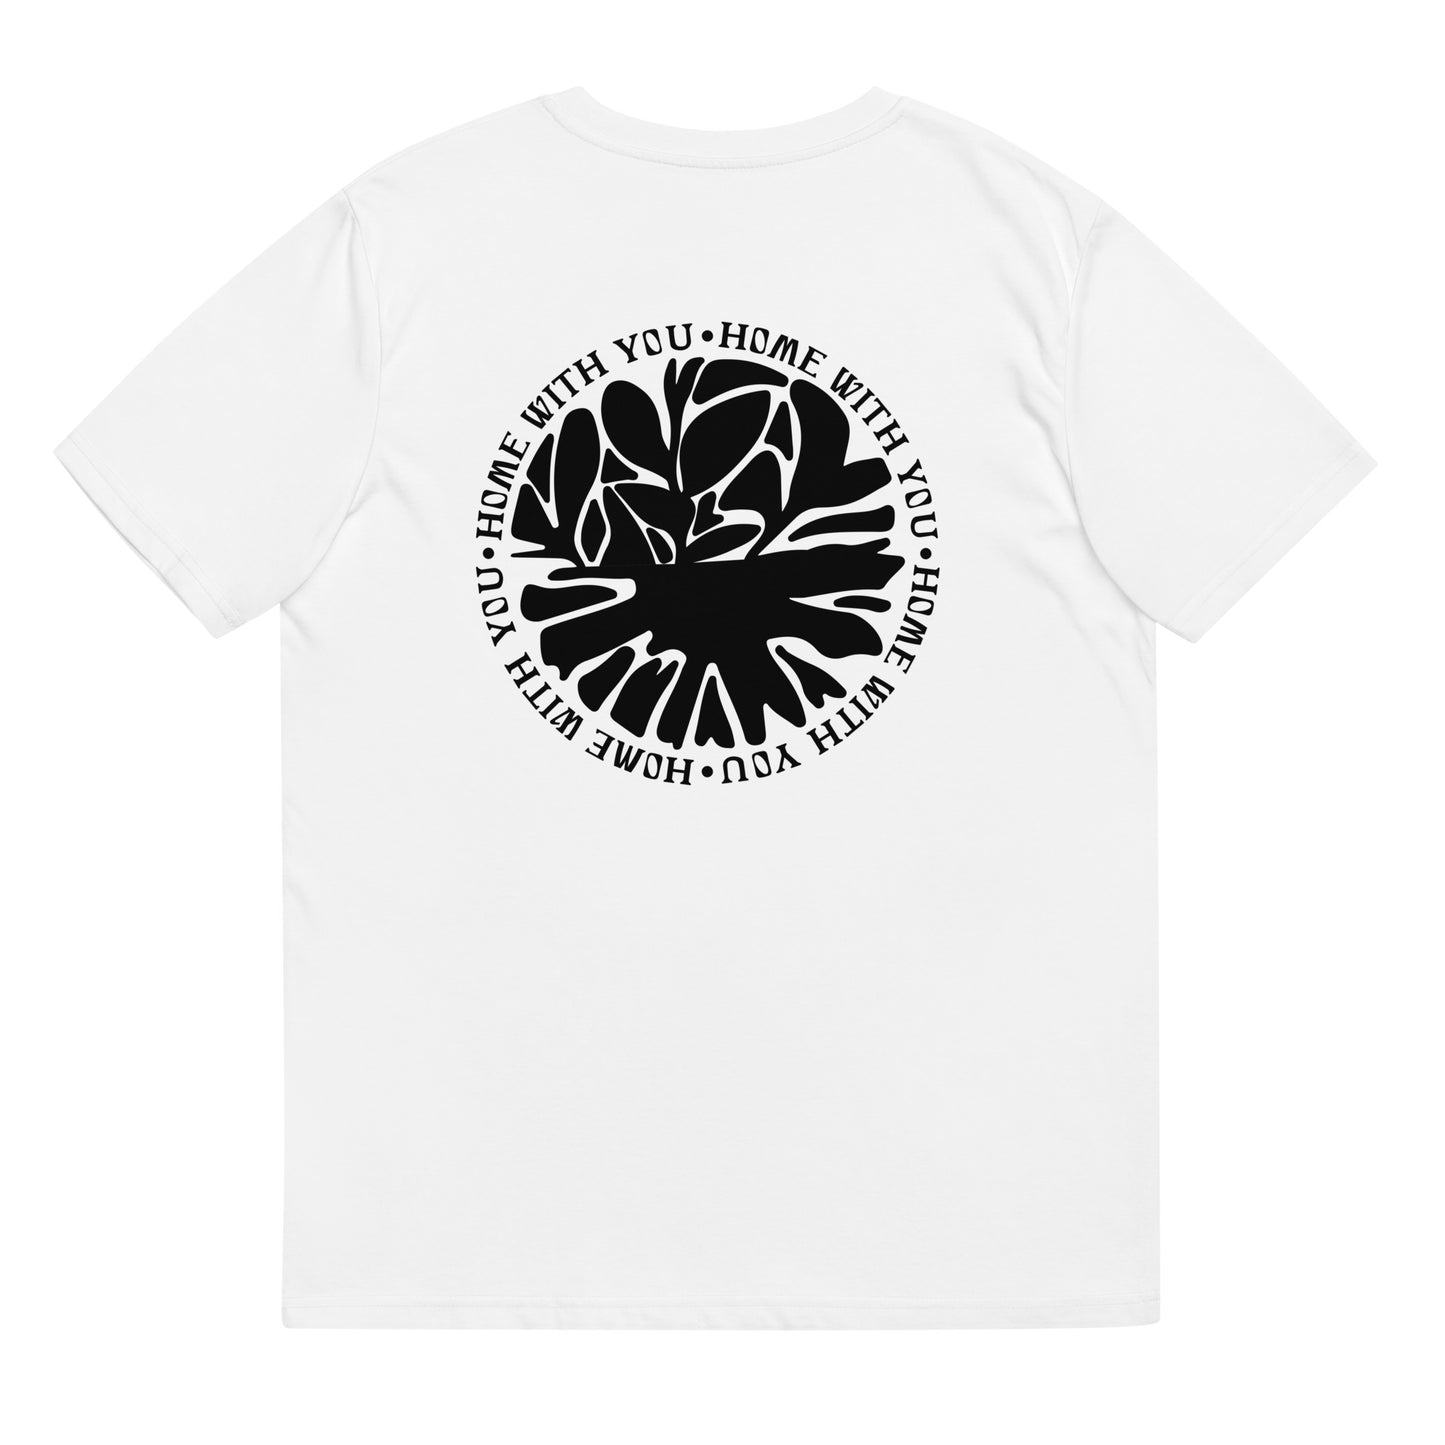 Shirt "HOME WITH YOU" black on white